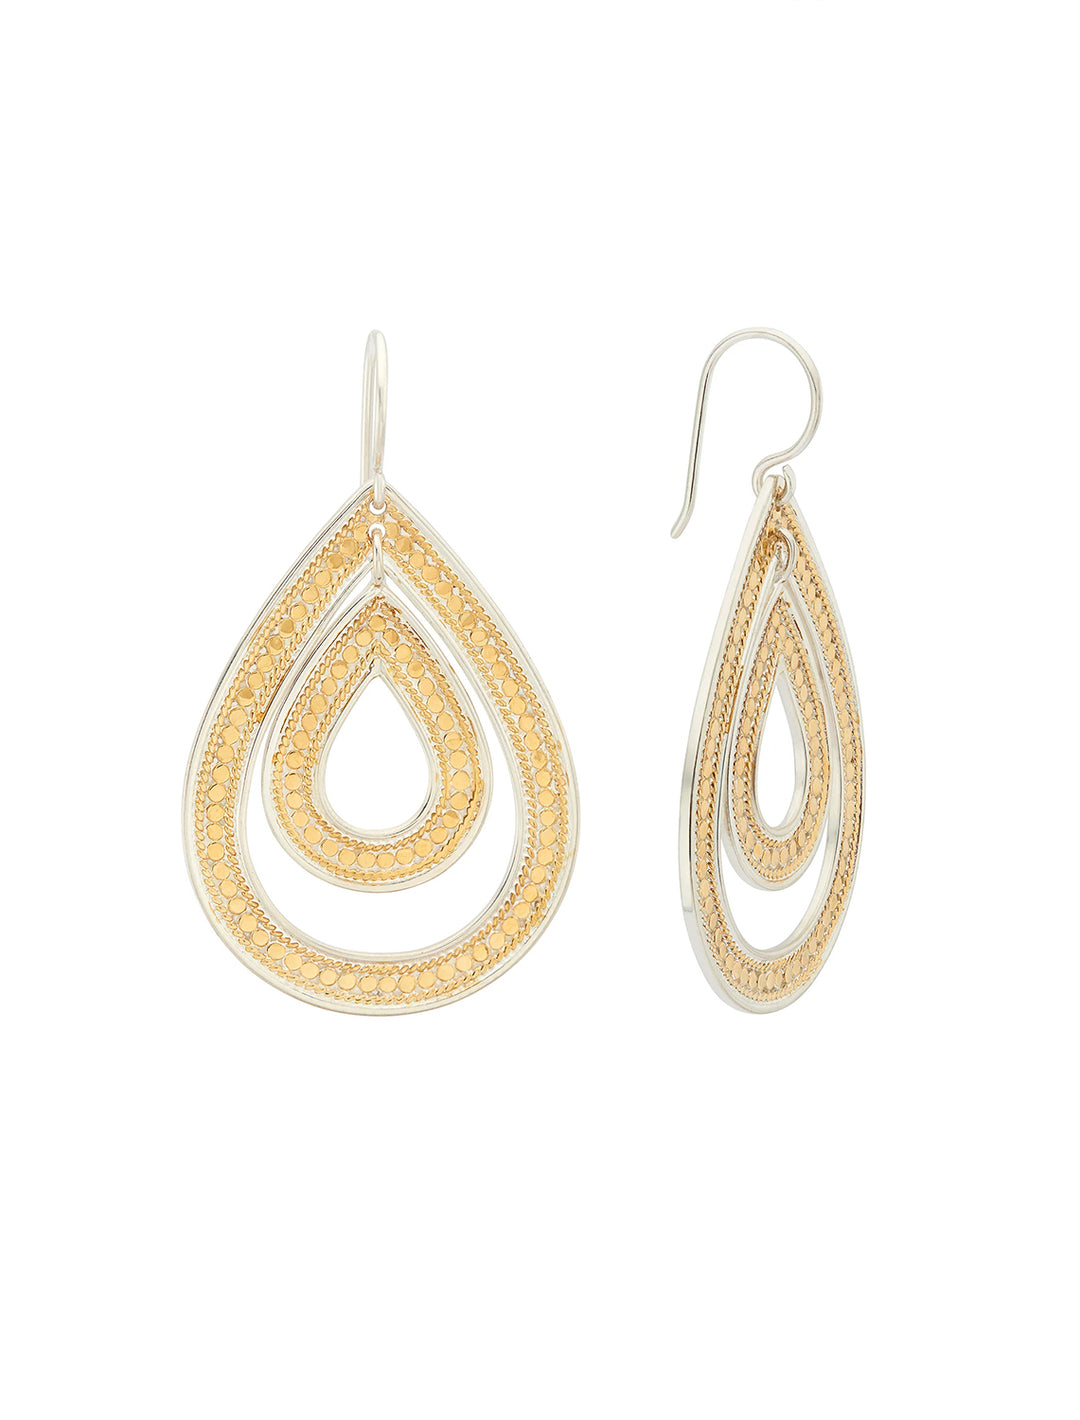 Front view of Anna Beck's two tone classic large open teardrop earrings.